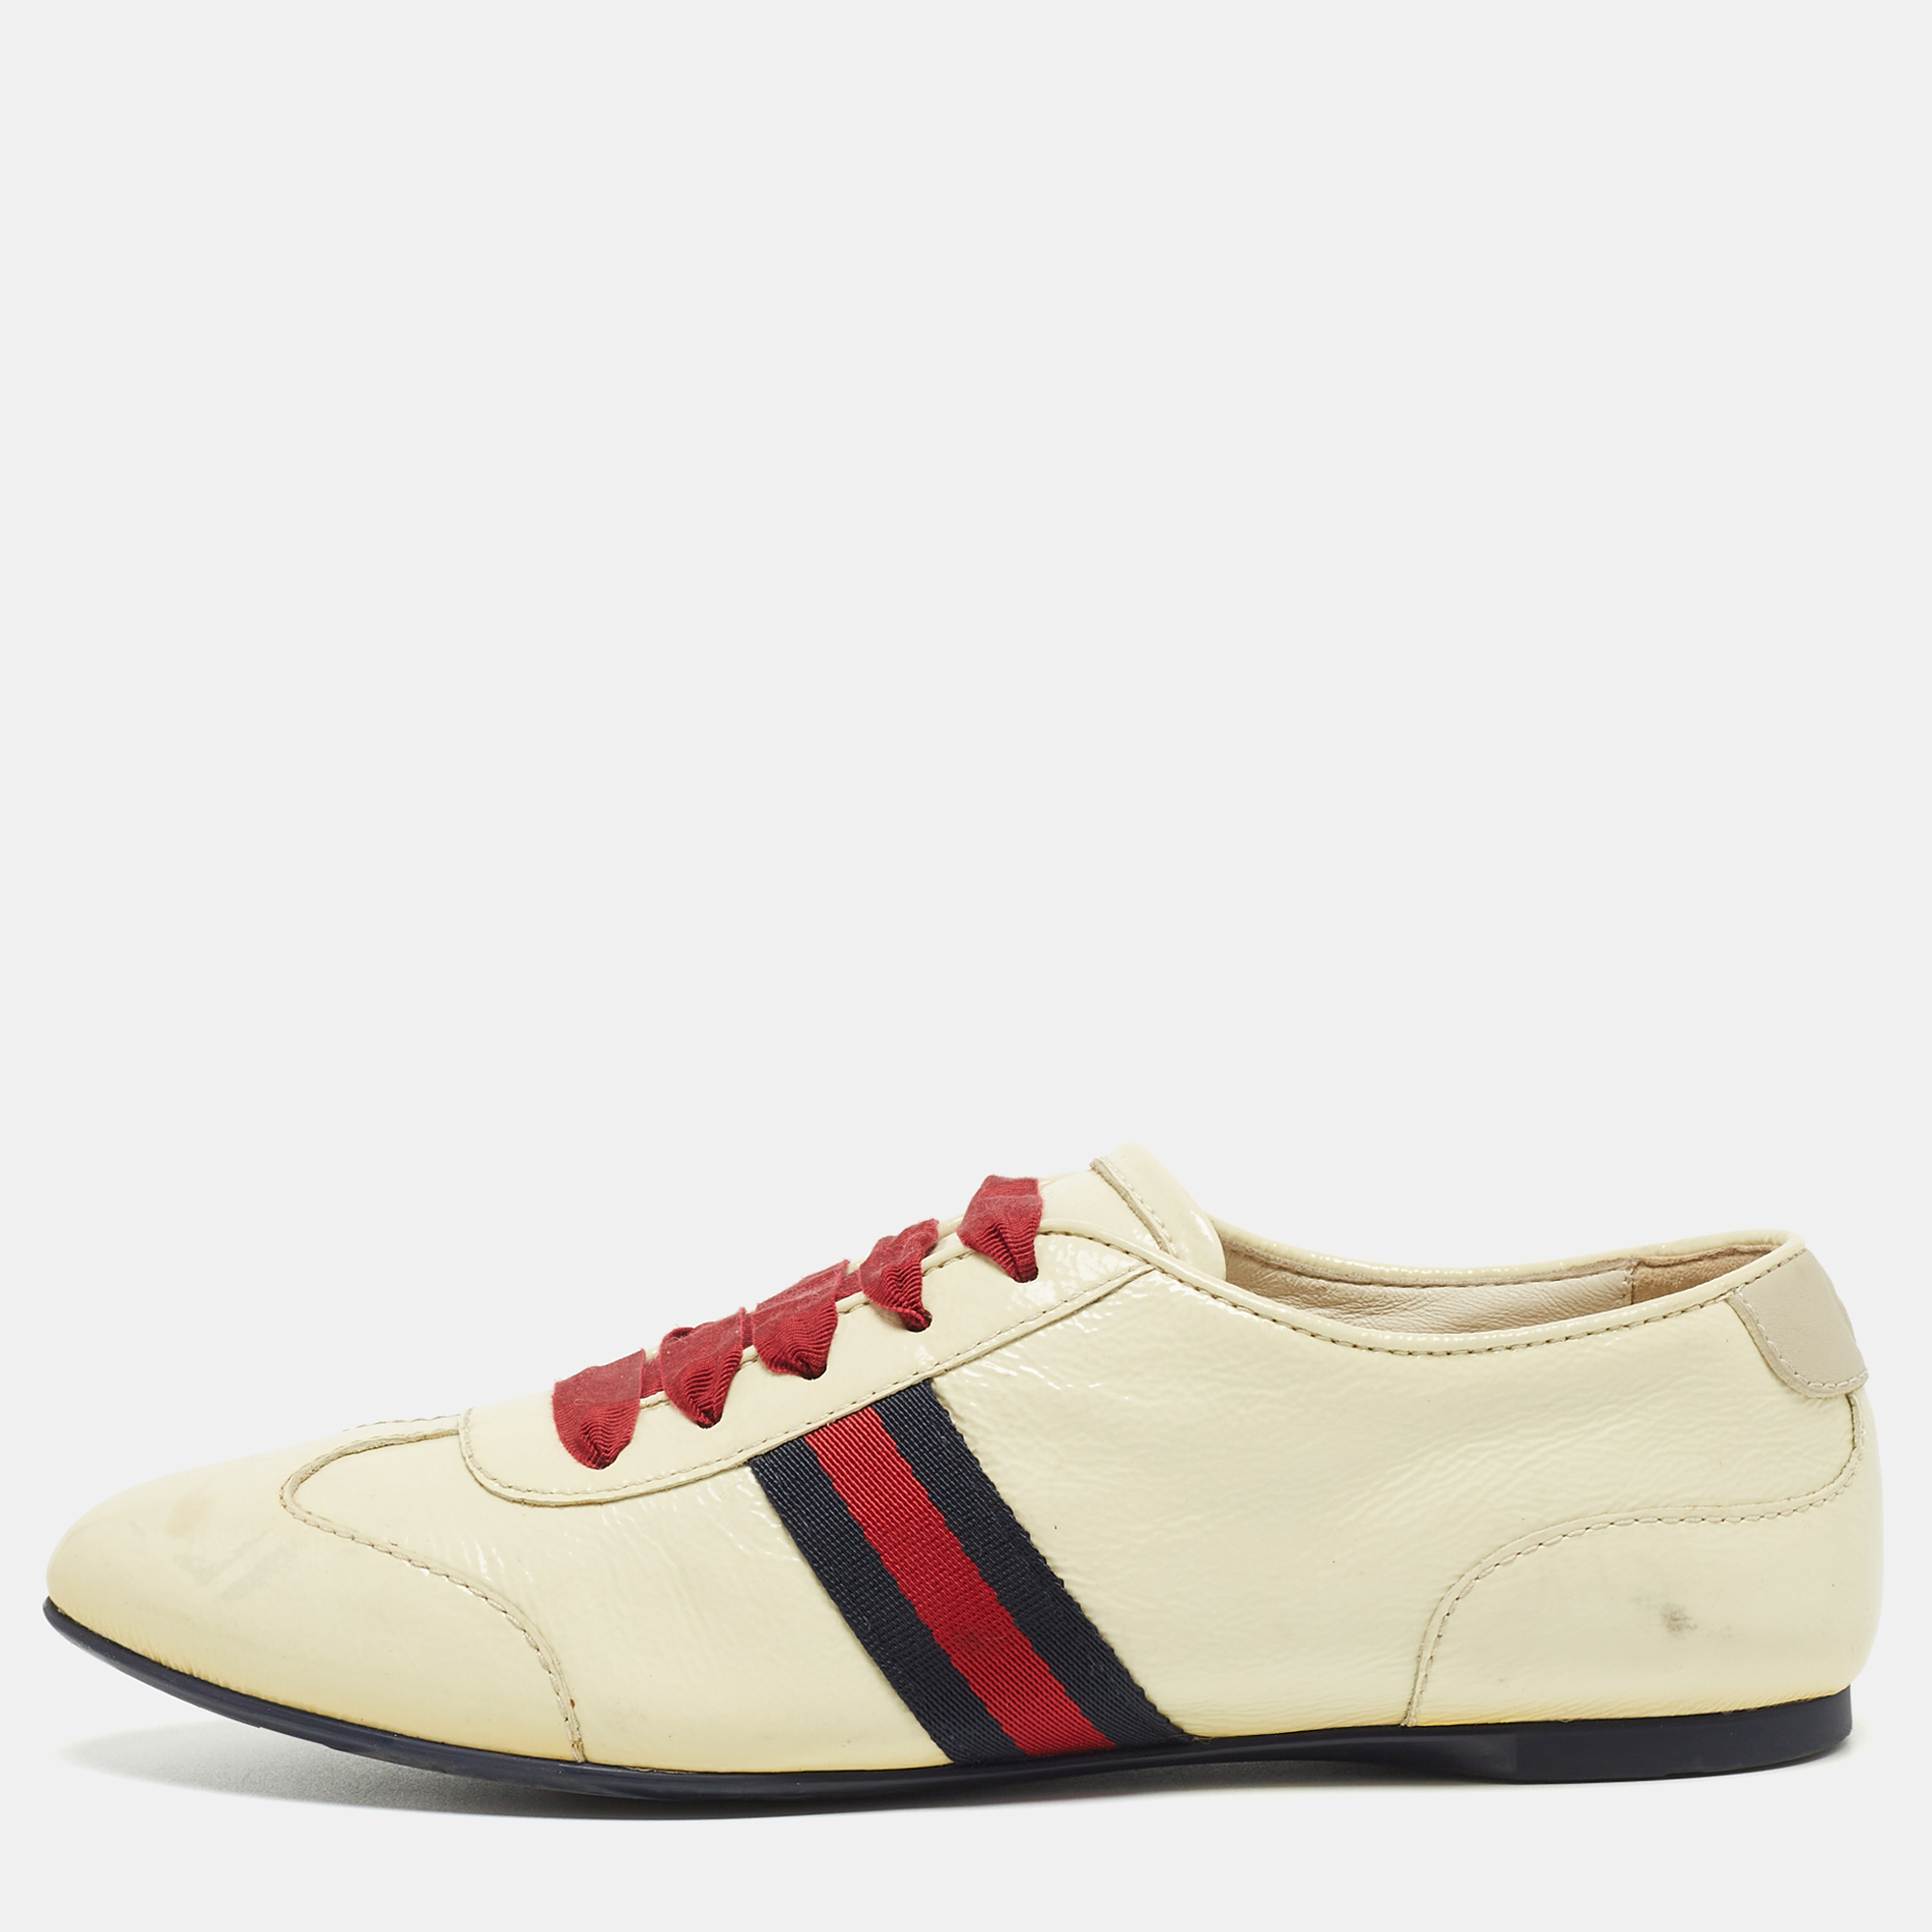 Step into fashion forward luxury with these designer sneakers. These Gucci kicks offer a harmonious blend of style and comfort perfect for those who demand sophistication in every step.